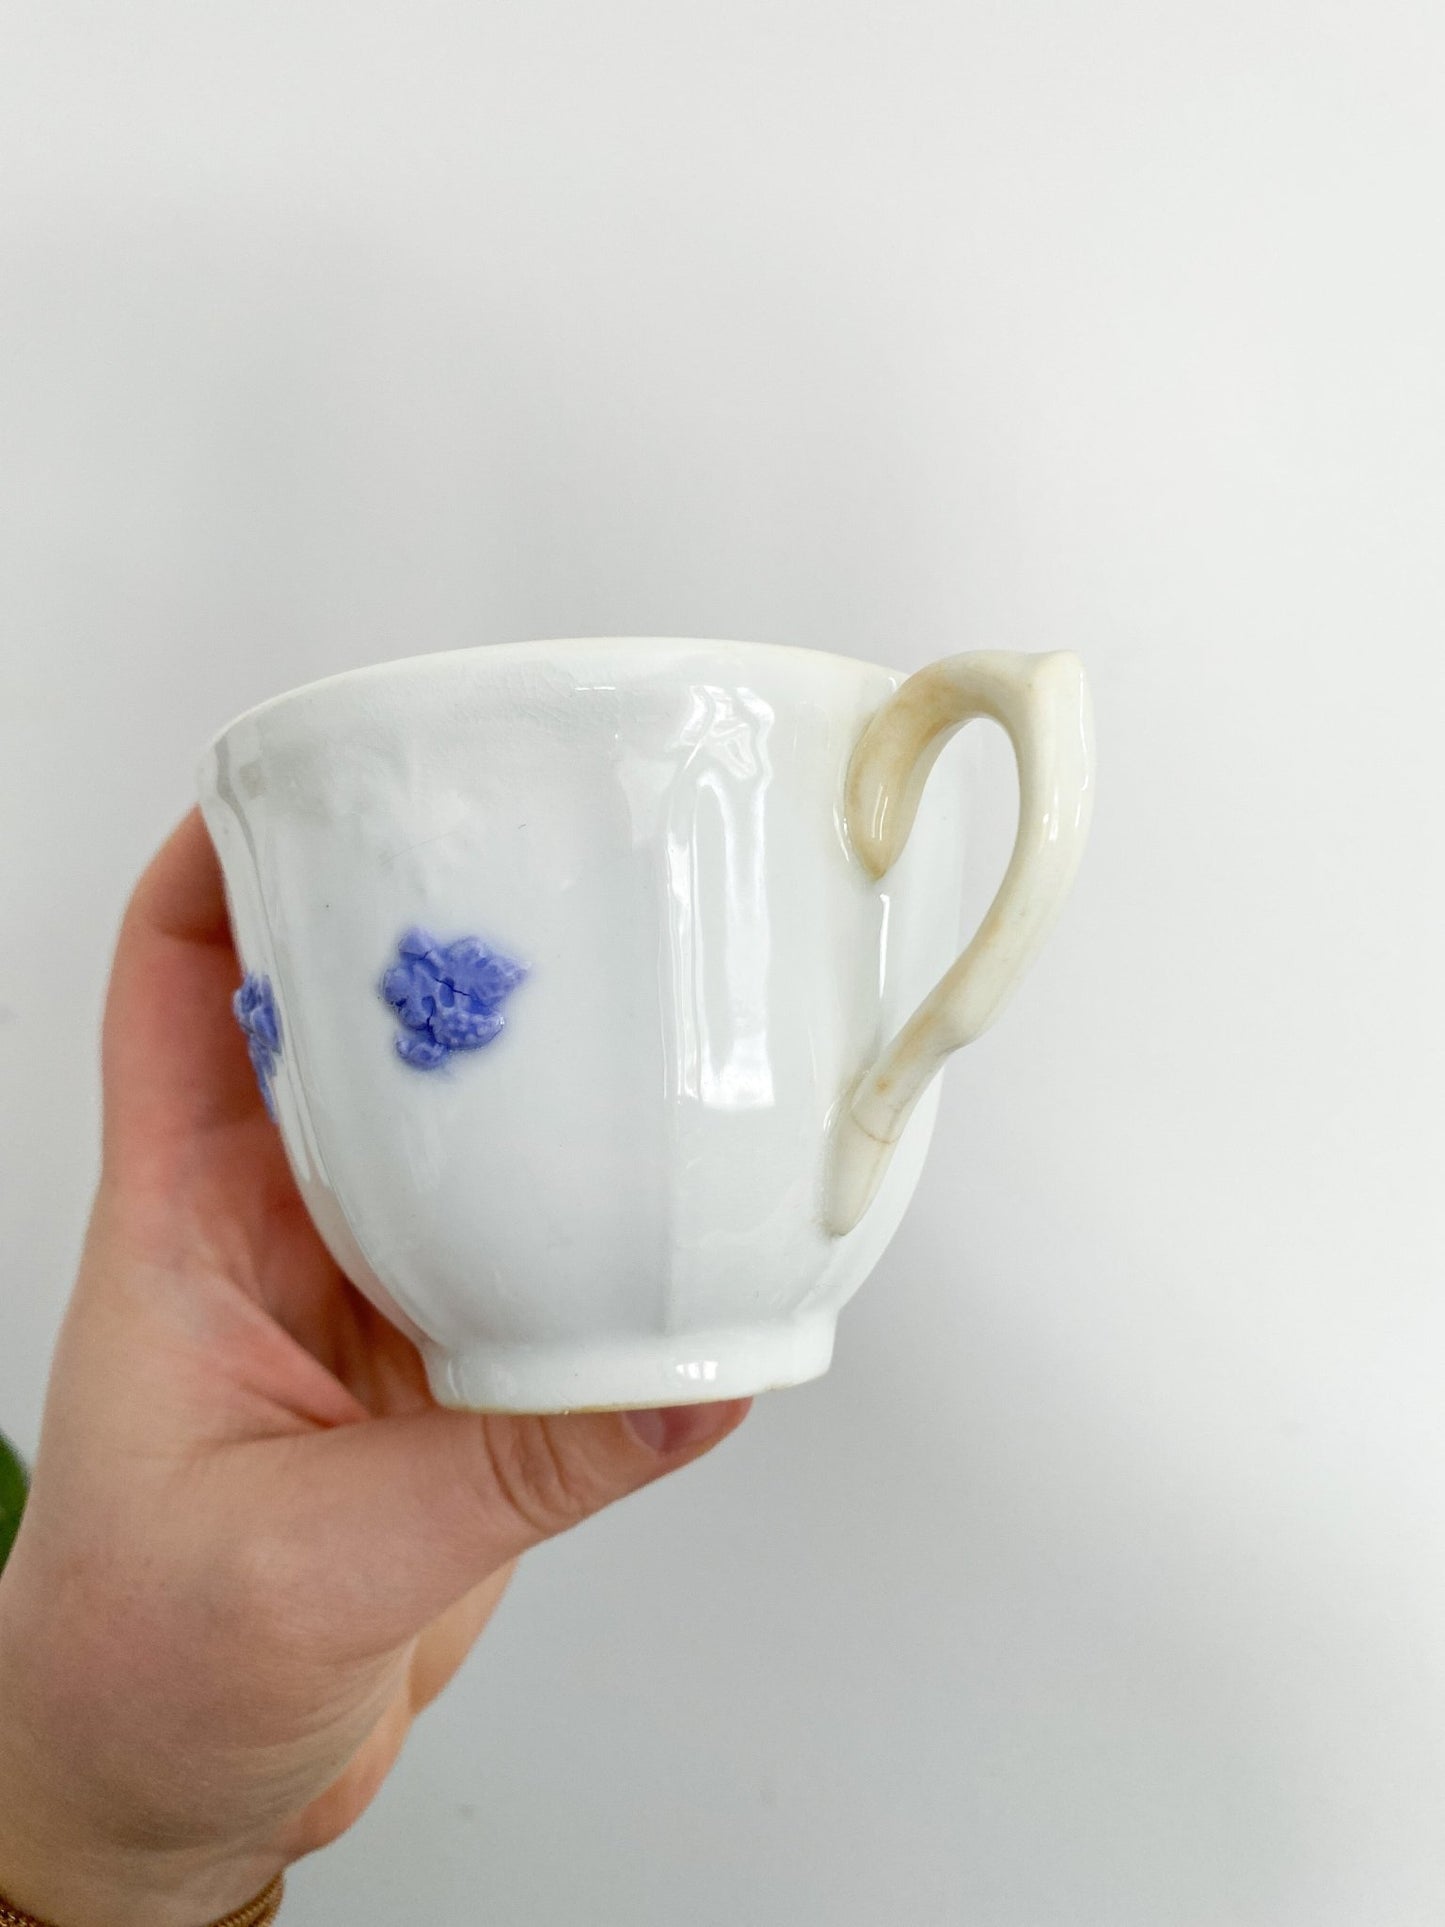 A woman holds the teacup in her hand. The teacup shows off the violet flowers, the handle is slightly yellowing and pointed to the right.